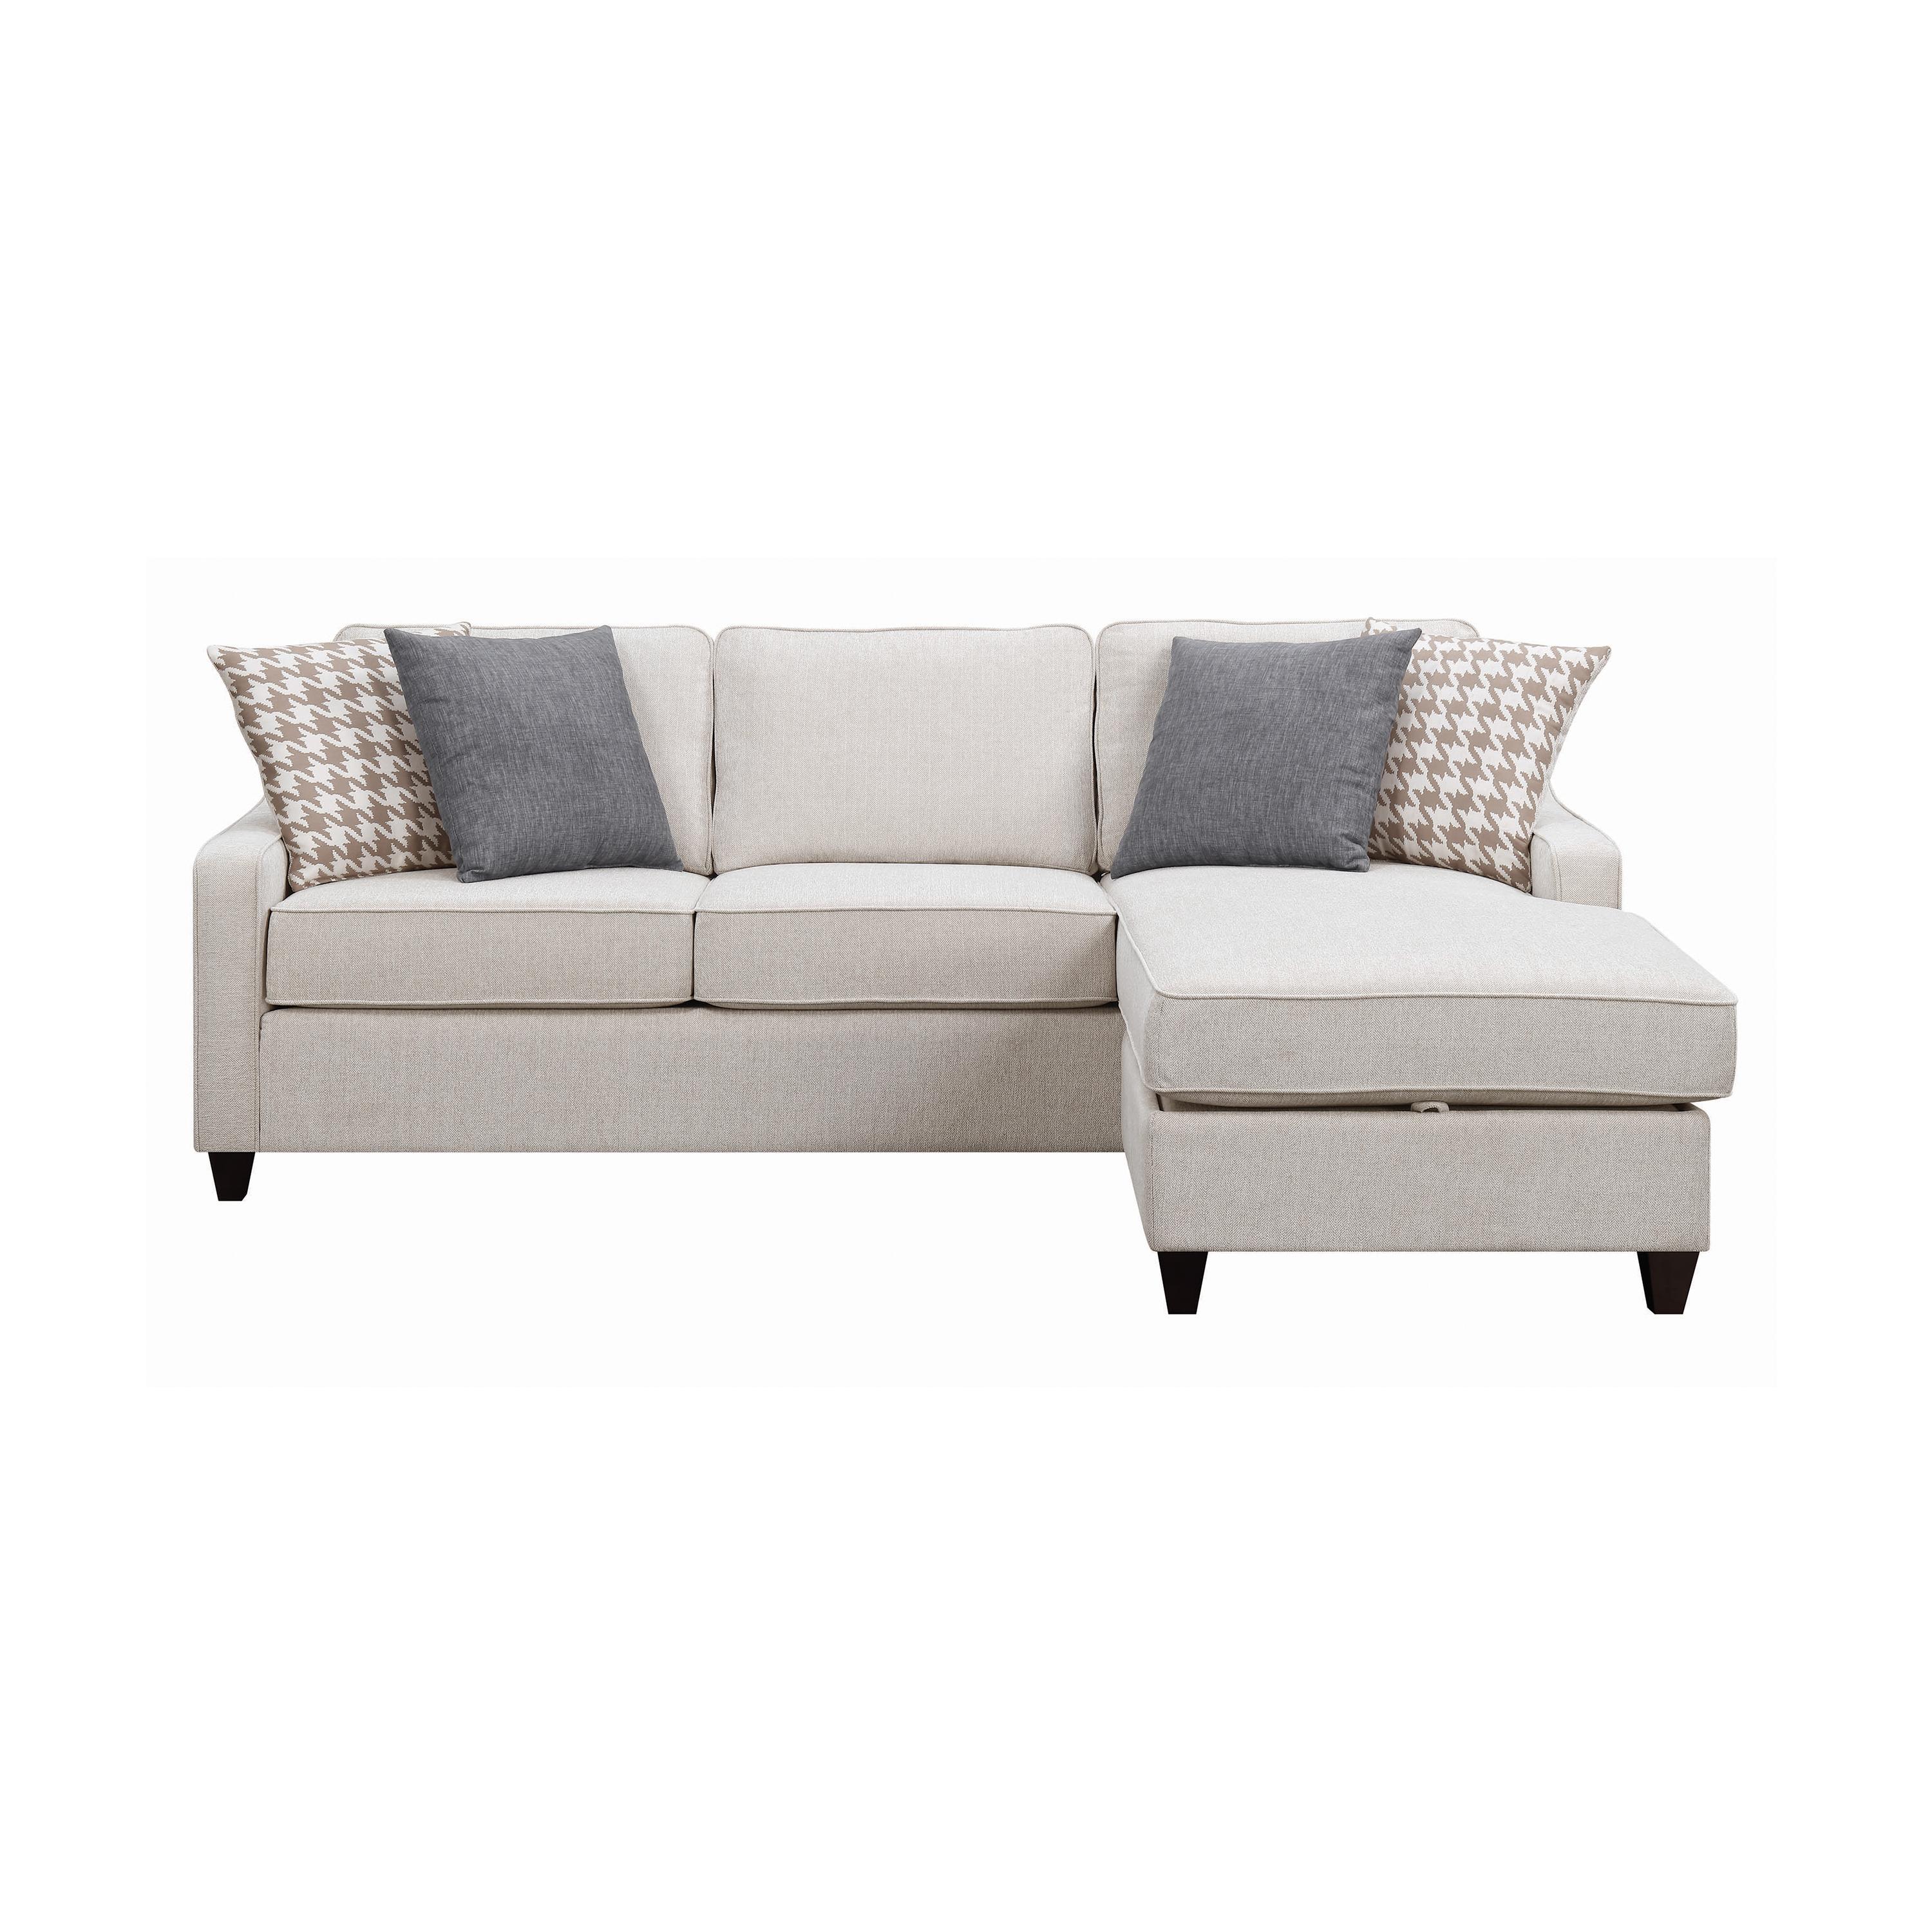 Transitional Sectional 501840 McLoughlin 501840 in Cream 